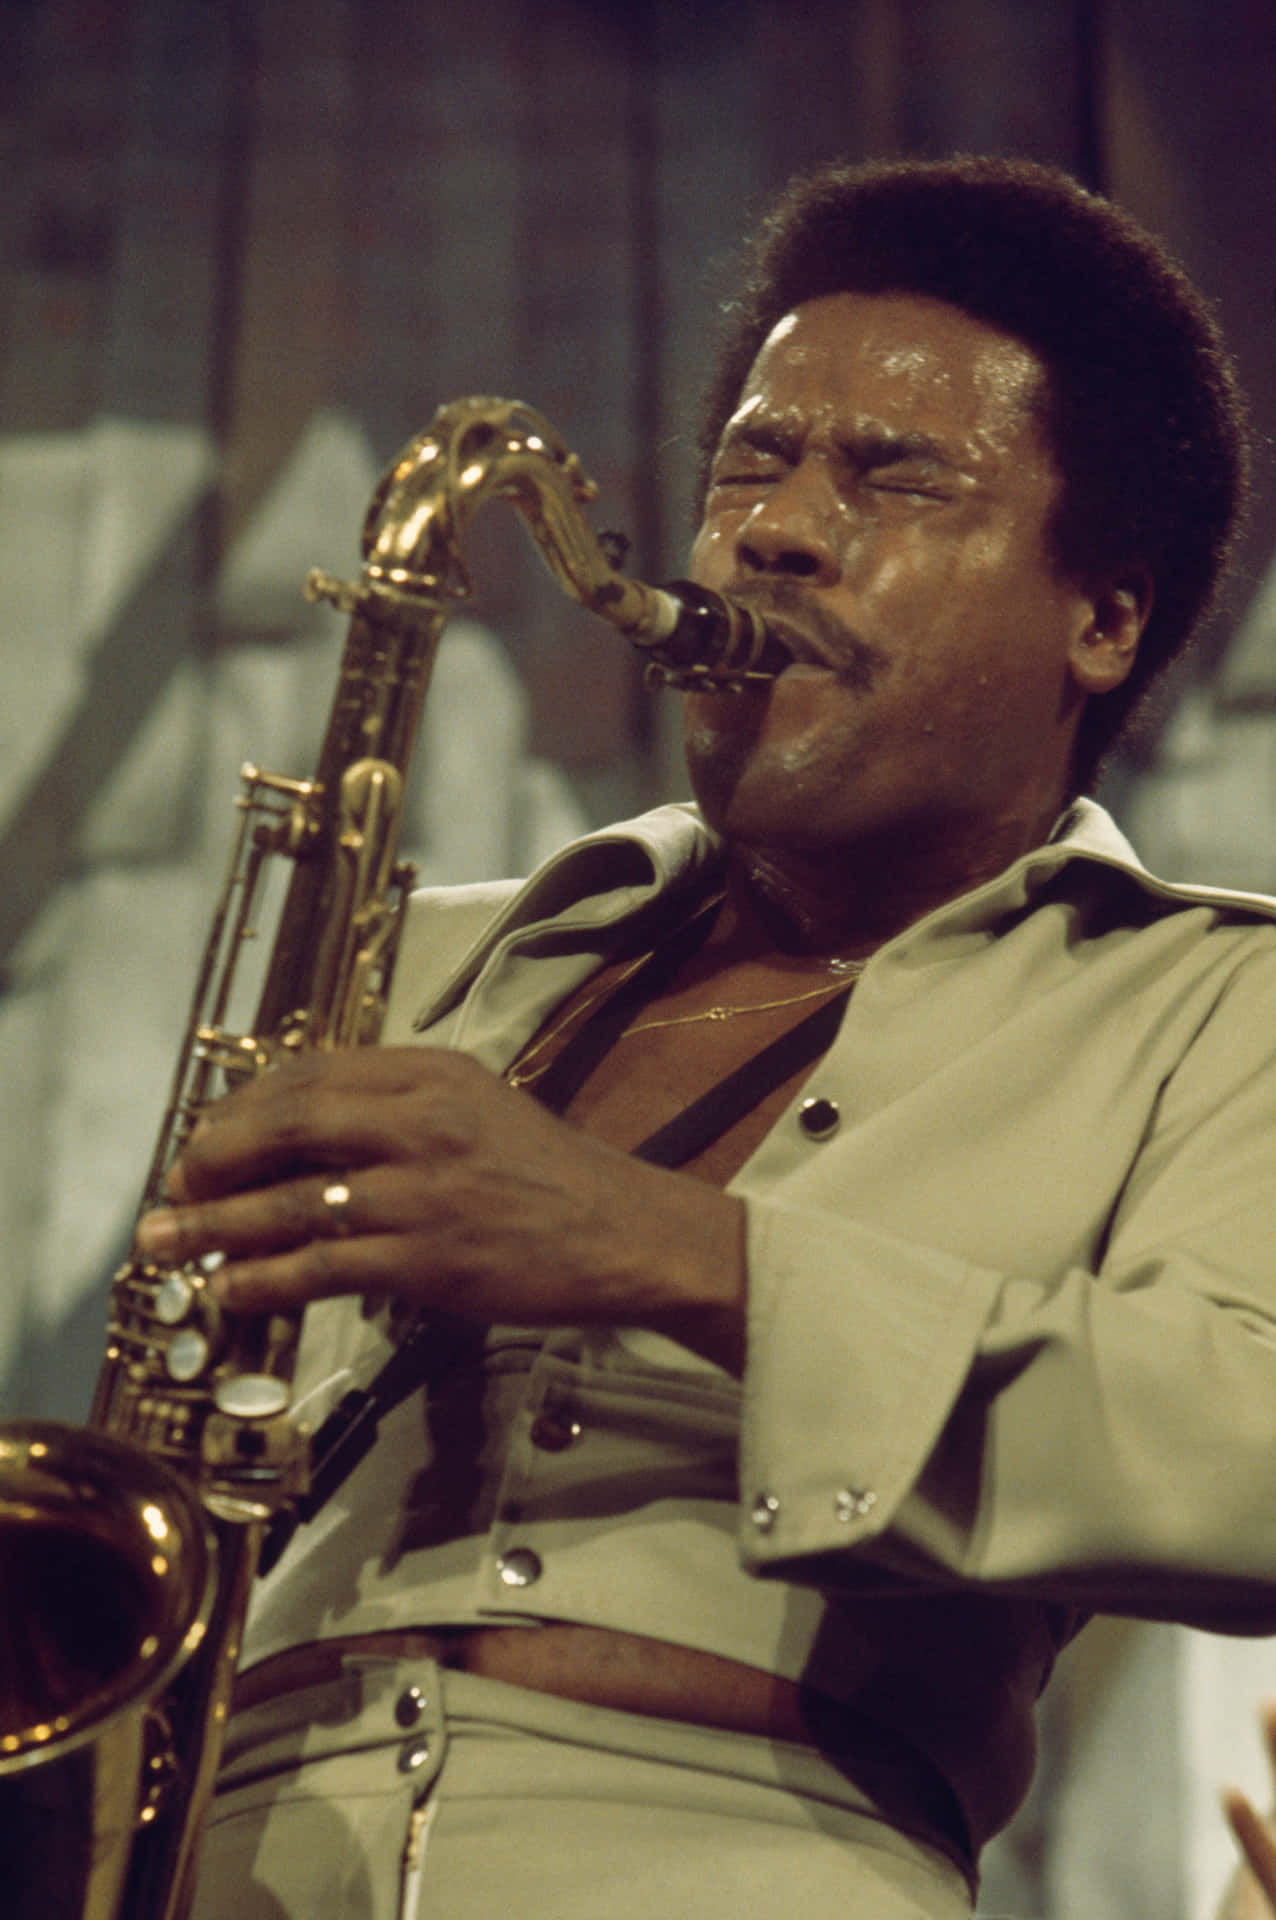 Wayne Shorter on stage with his saxophone Wallpaper